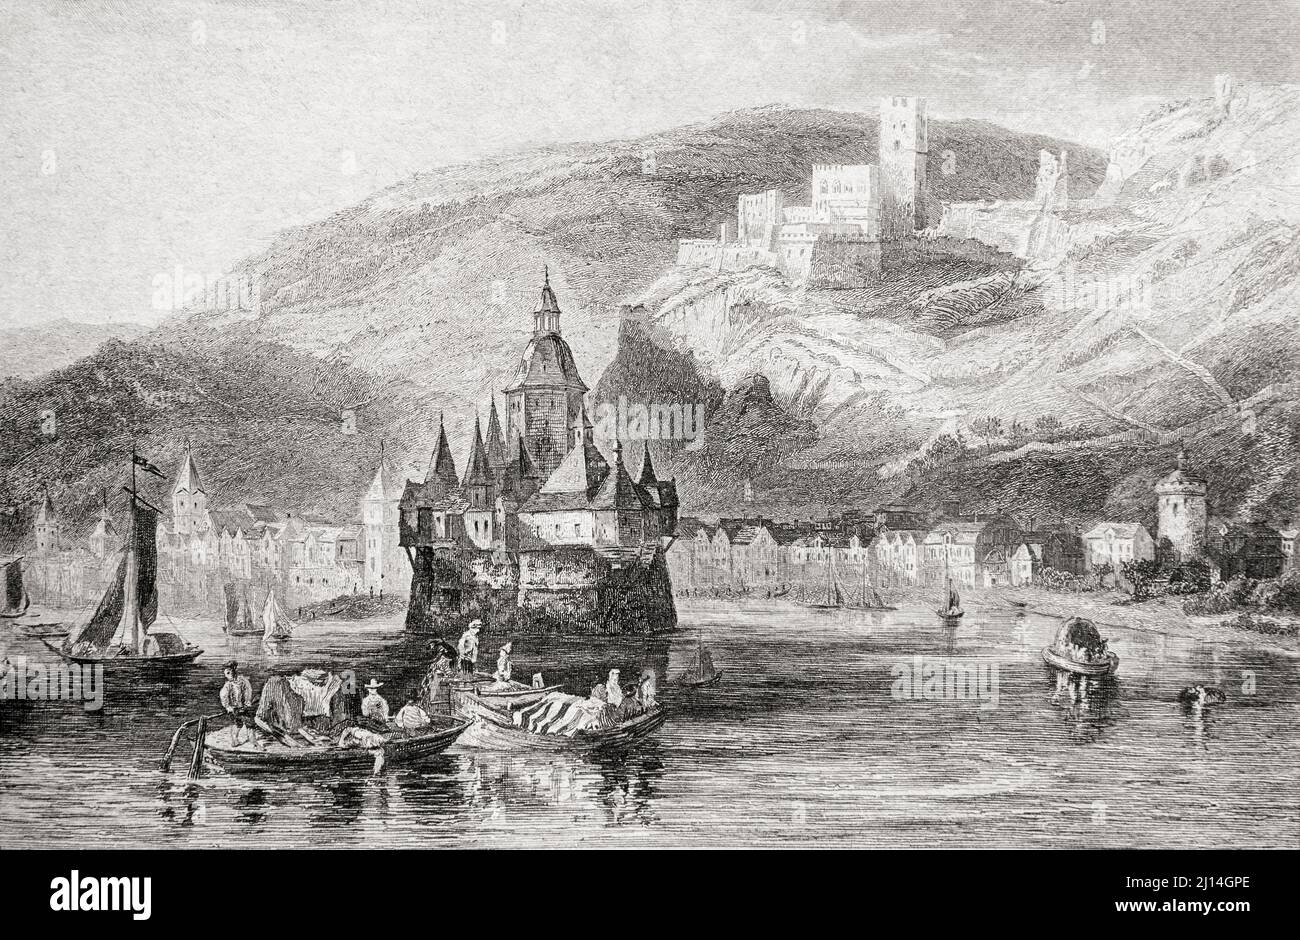 Castle of Pfalz and ruins of Gutenfels, Germany. 19th century steel engraving by del Thienon, Lemaitre direxit and Lalaisse. Stock Photo